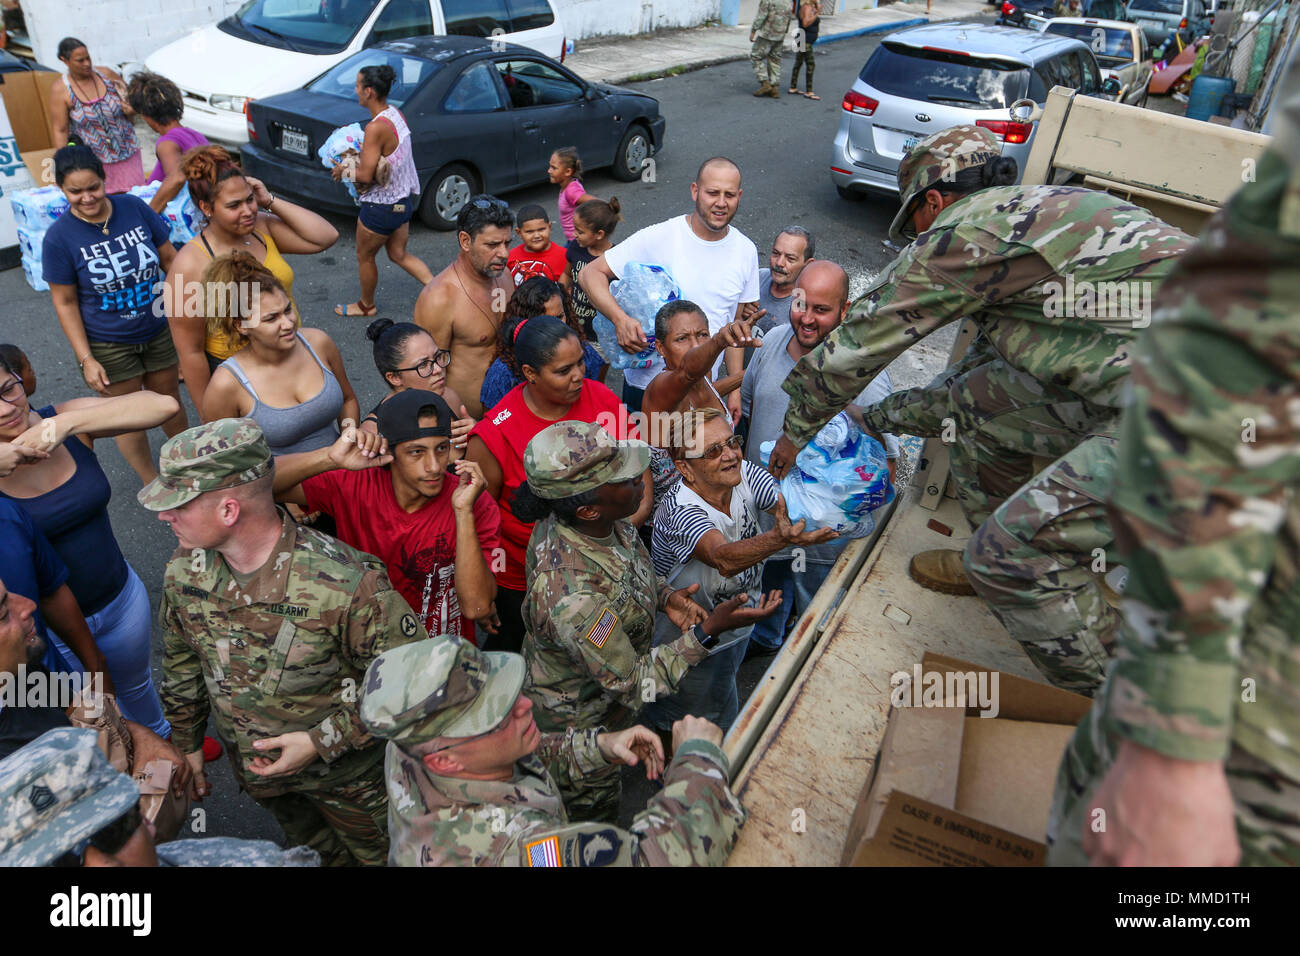 Master Sgt. Demel Anderson, a shower/laundry and clothing repair specialist assigned to the 3rd Expeditionary Sustainment Command, distributes water to a resident in the sector of Las Palmas in San Juan, Puerto Rico, October 12, 2017. The full force of the federal government continues to make progress towards recovery, working hand-in-hand with the U.S. Virgin Islands and Puerto Rico officials, municipalities, businesses and voluntary agencies on the islands. (U.S. Army photo by Sgt. 1st Class Donna Davis) Stock Photo